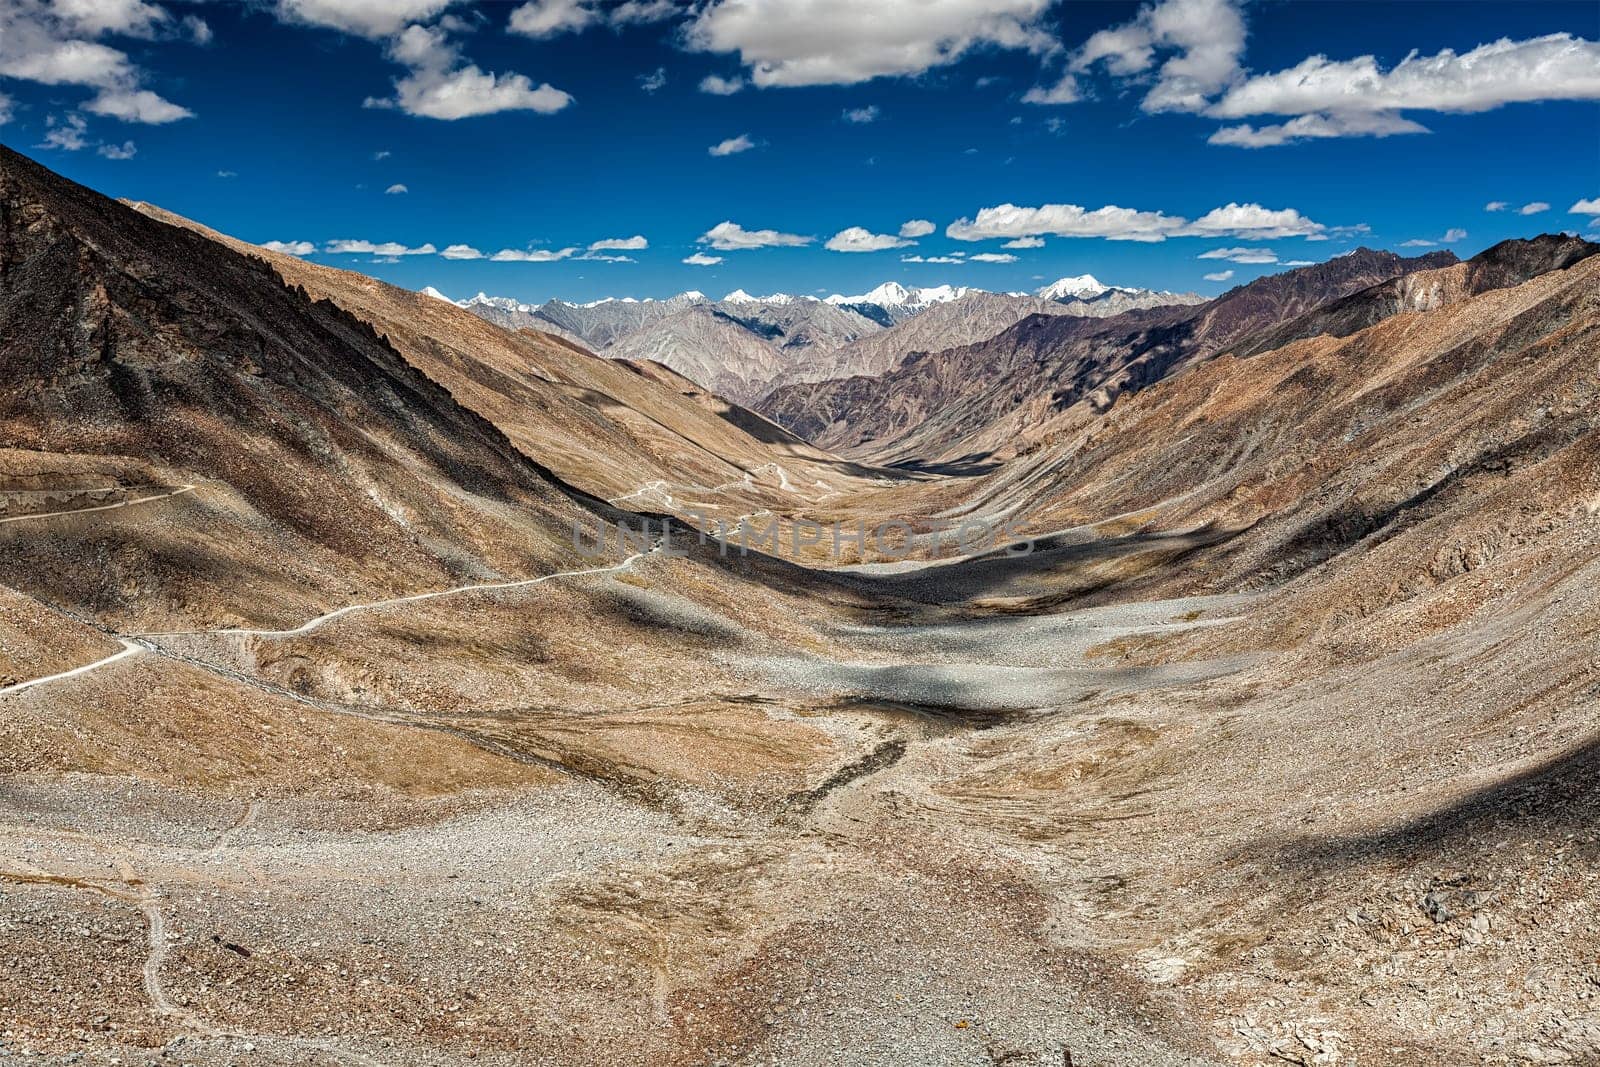 View of Karakoram range and road in valley from Kardung La - the highest motorable pass in the world (5602 m) in Himalayas. Ladakh, India